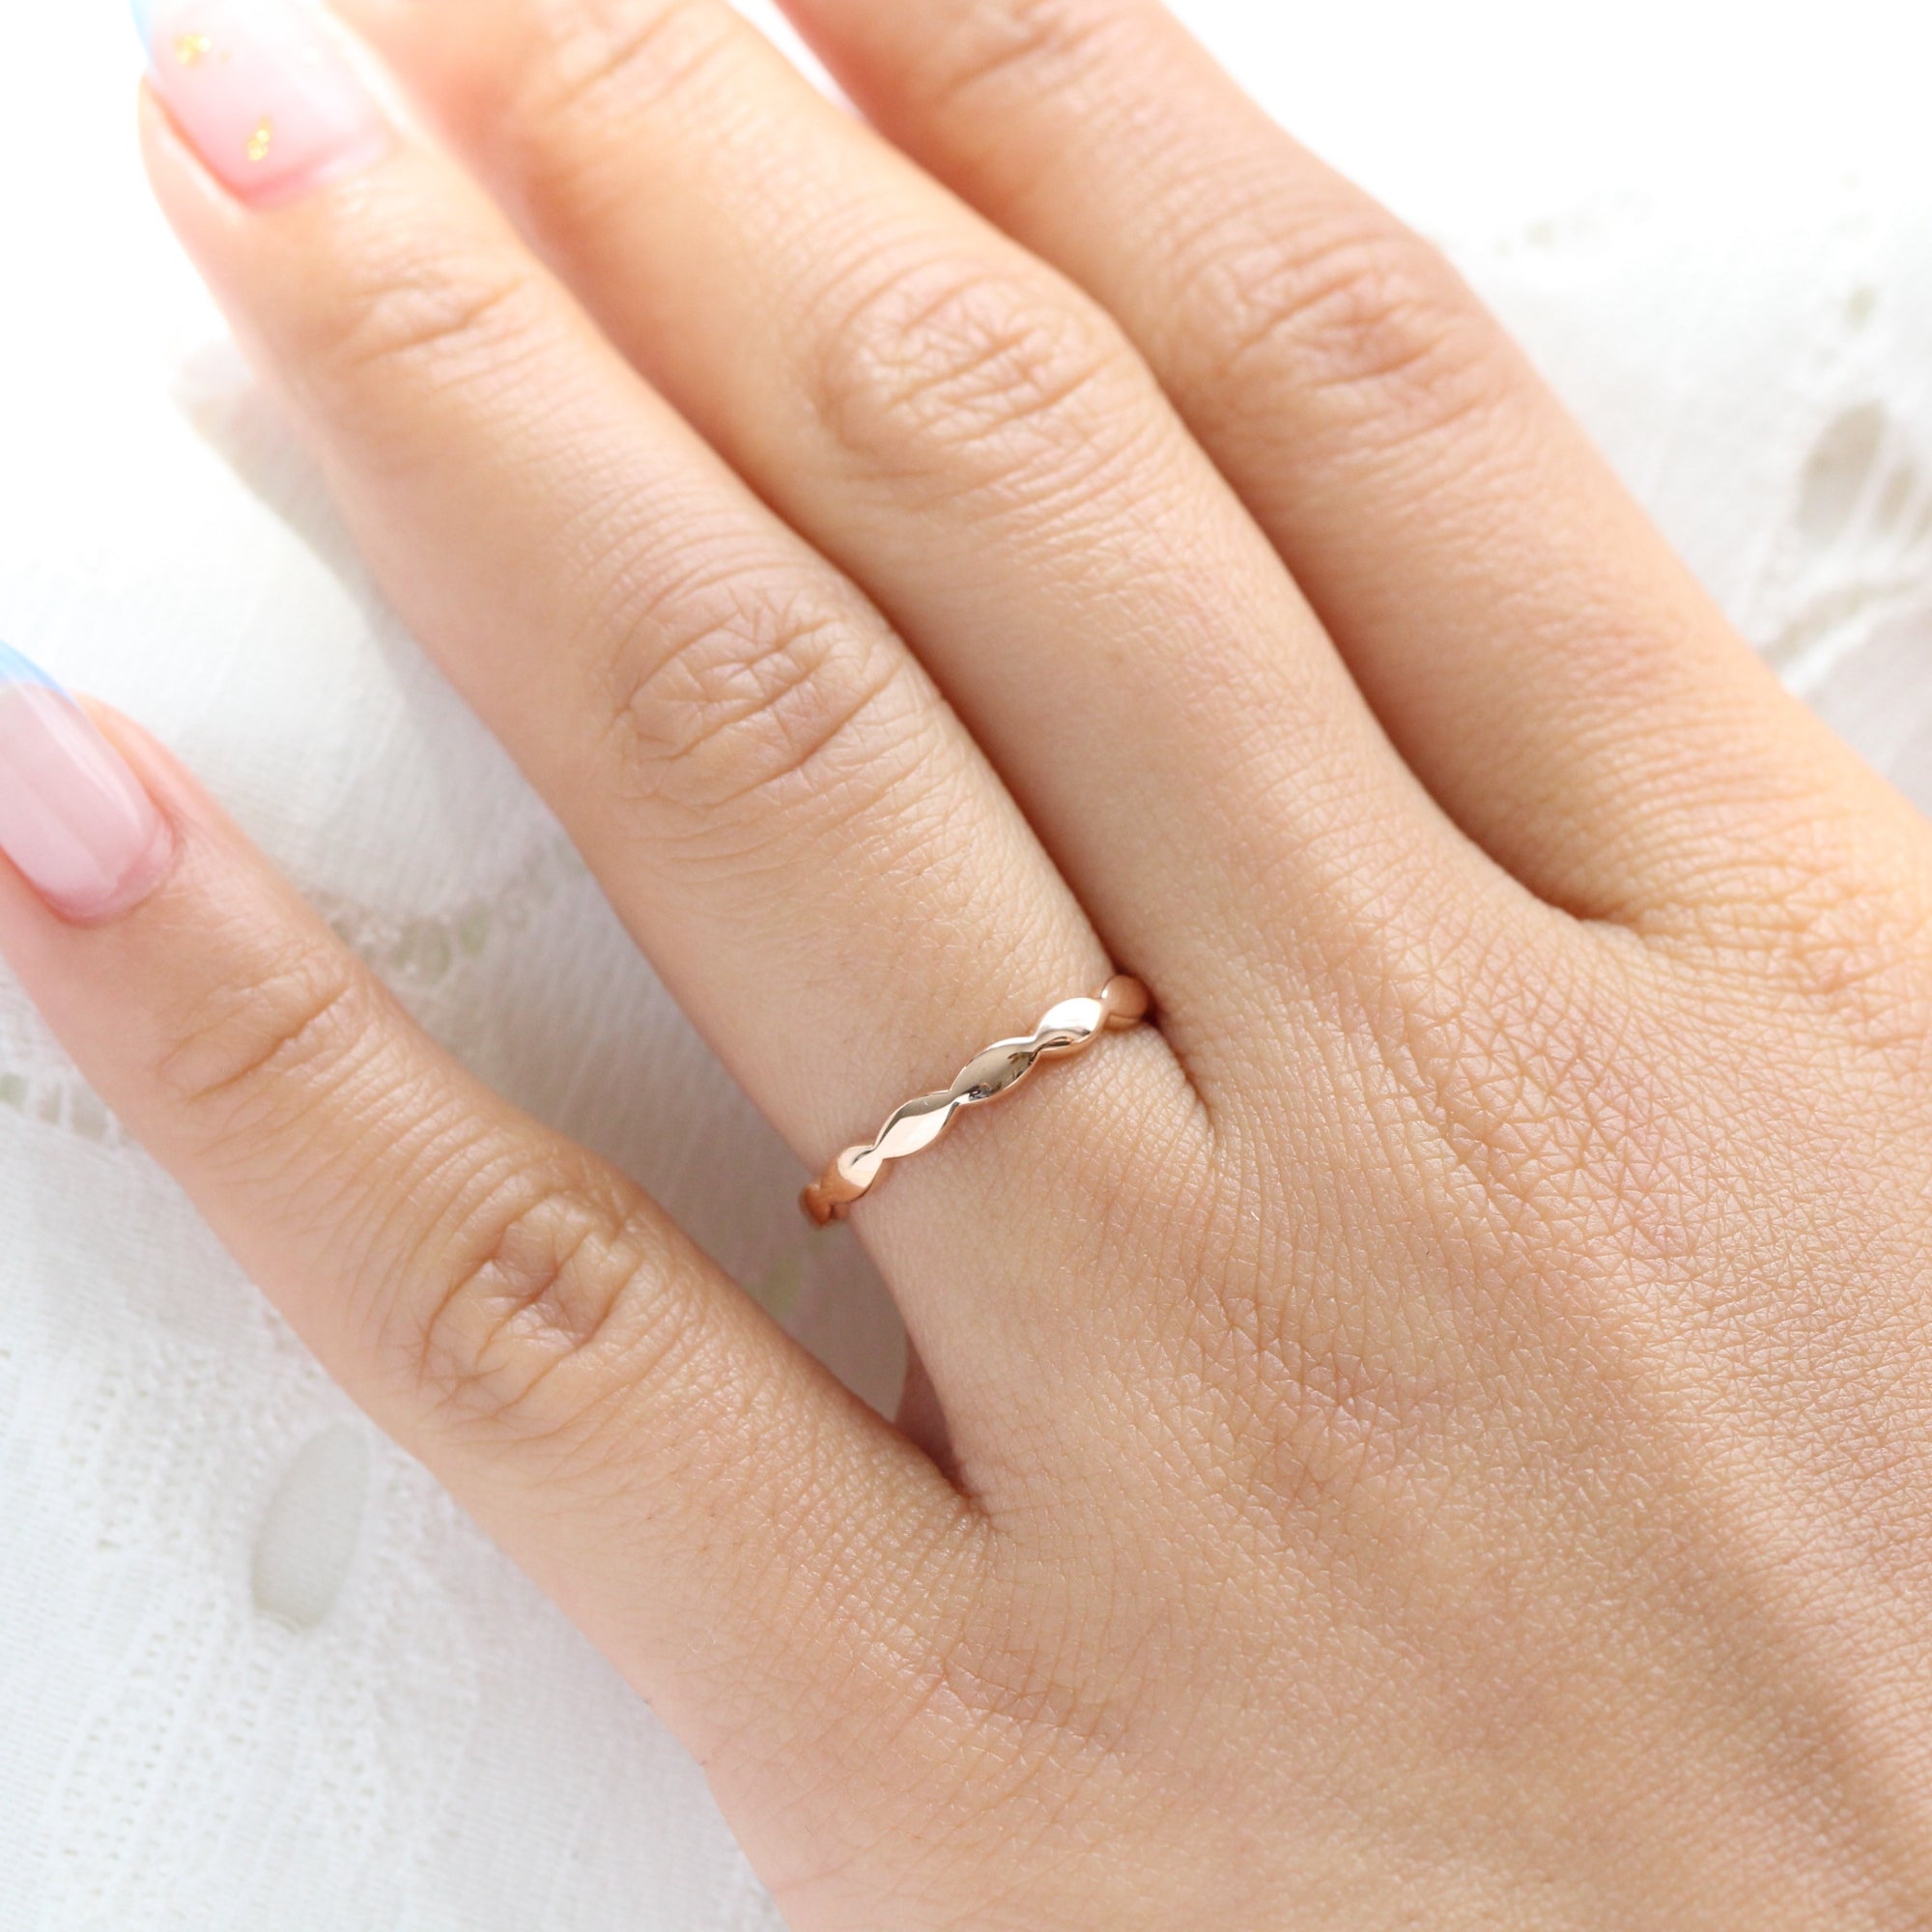 Unique gender neutral wedding ring, scalloped wedding band rose gold anniversary ring la more design jewelry